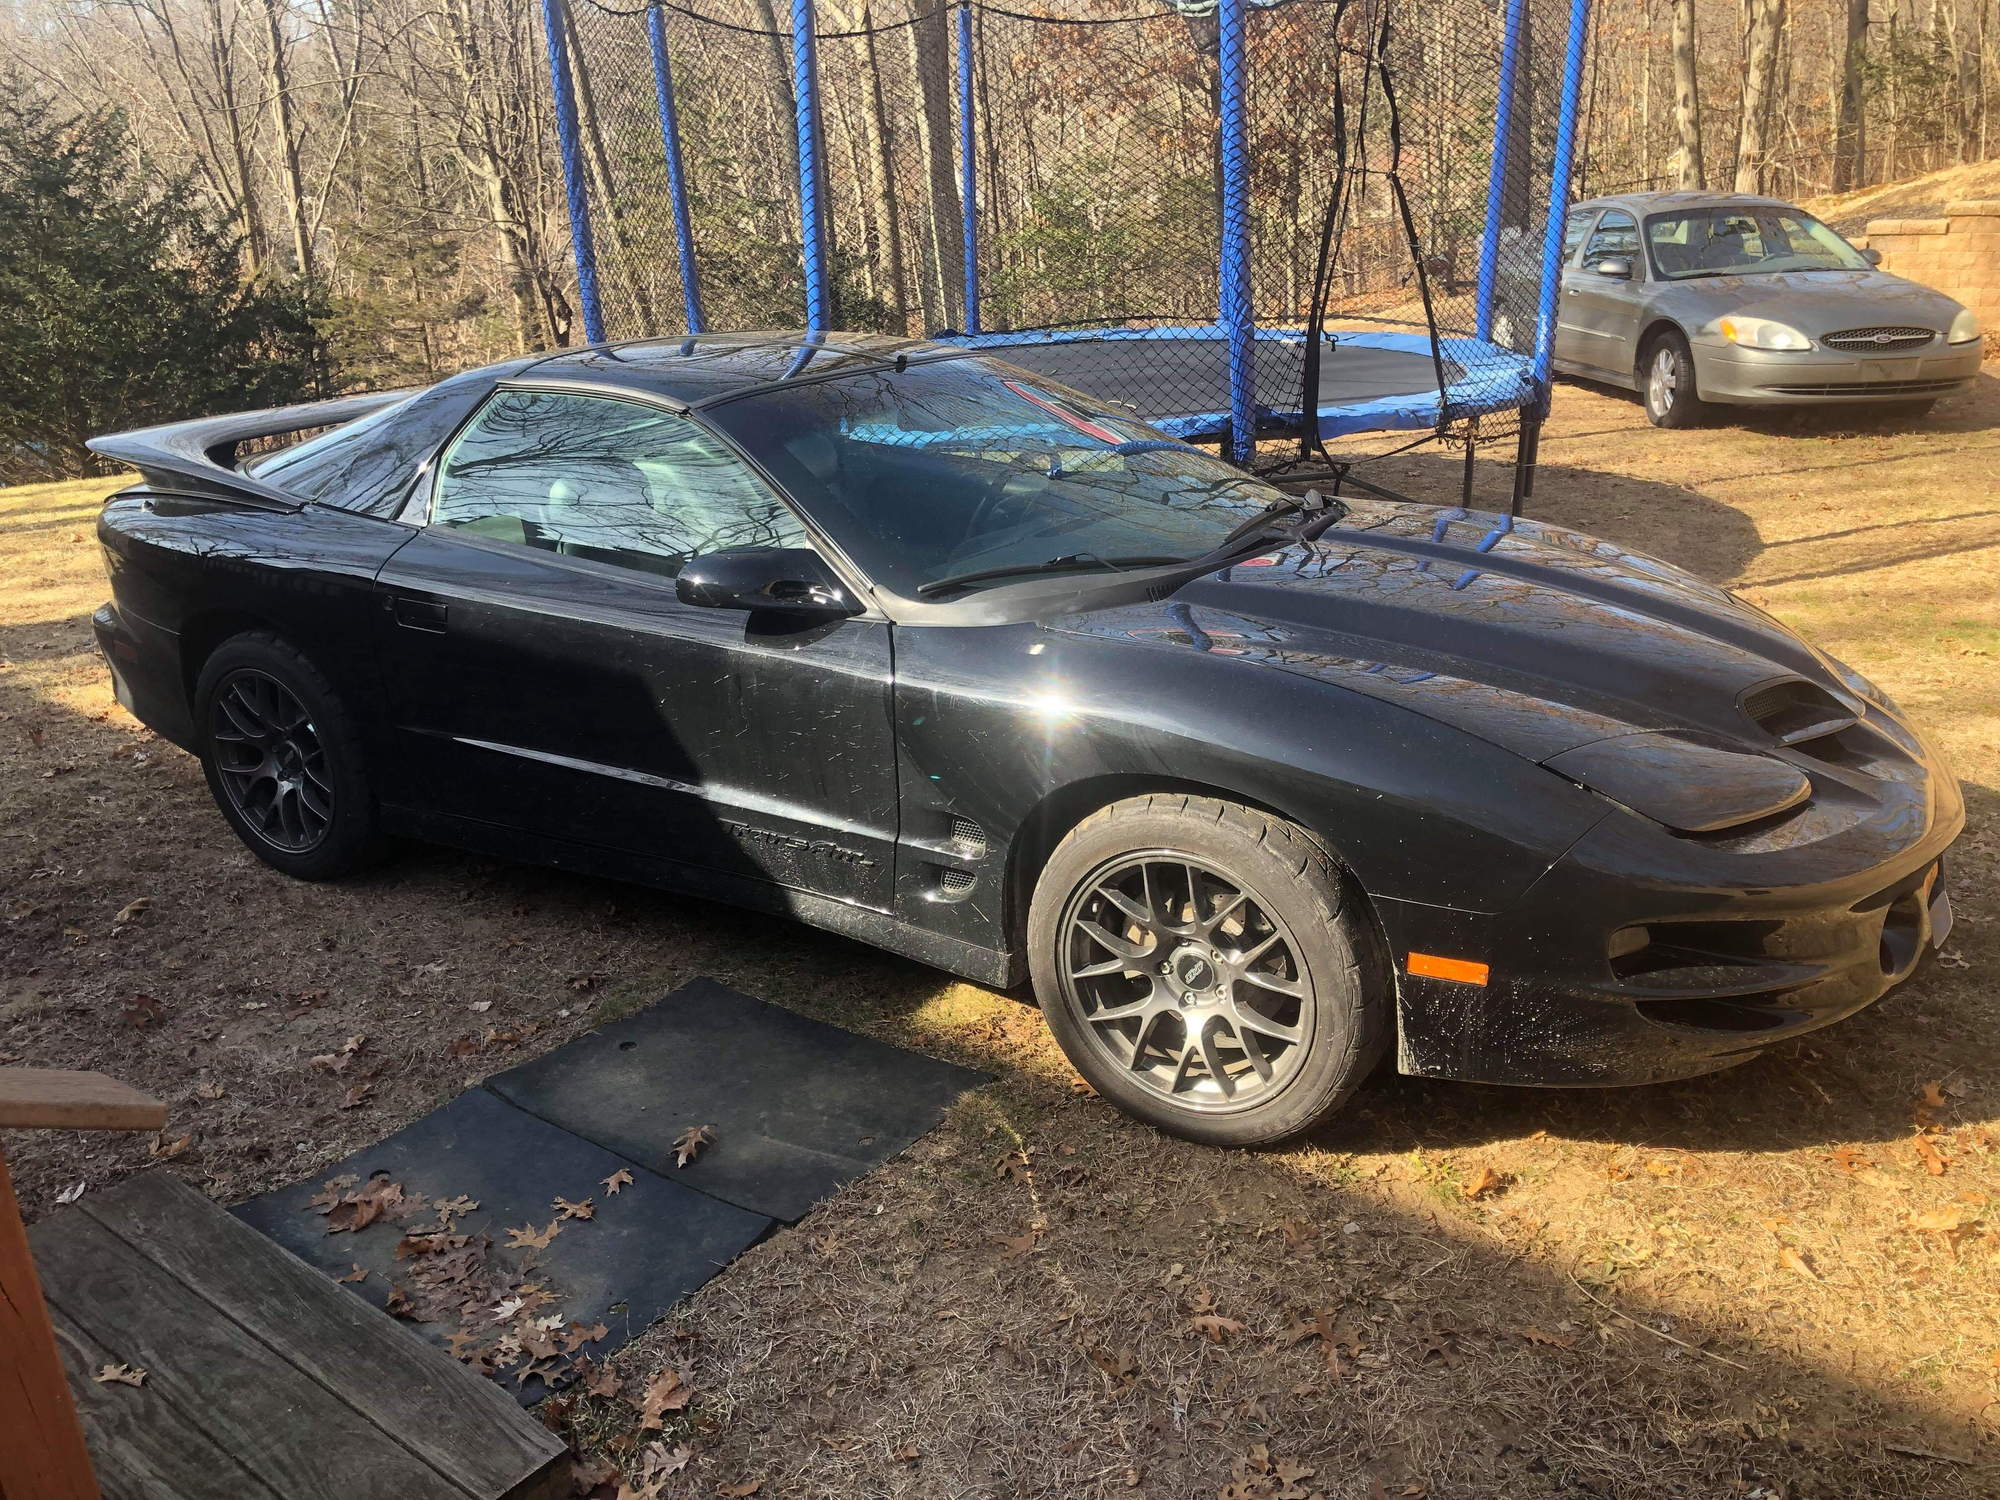 2002 Pontiac Firebird - 1999 Trans Am Full Part Out ***Updated - Smithtown, NY 11787, United States